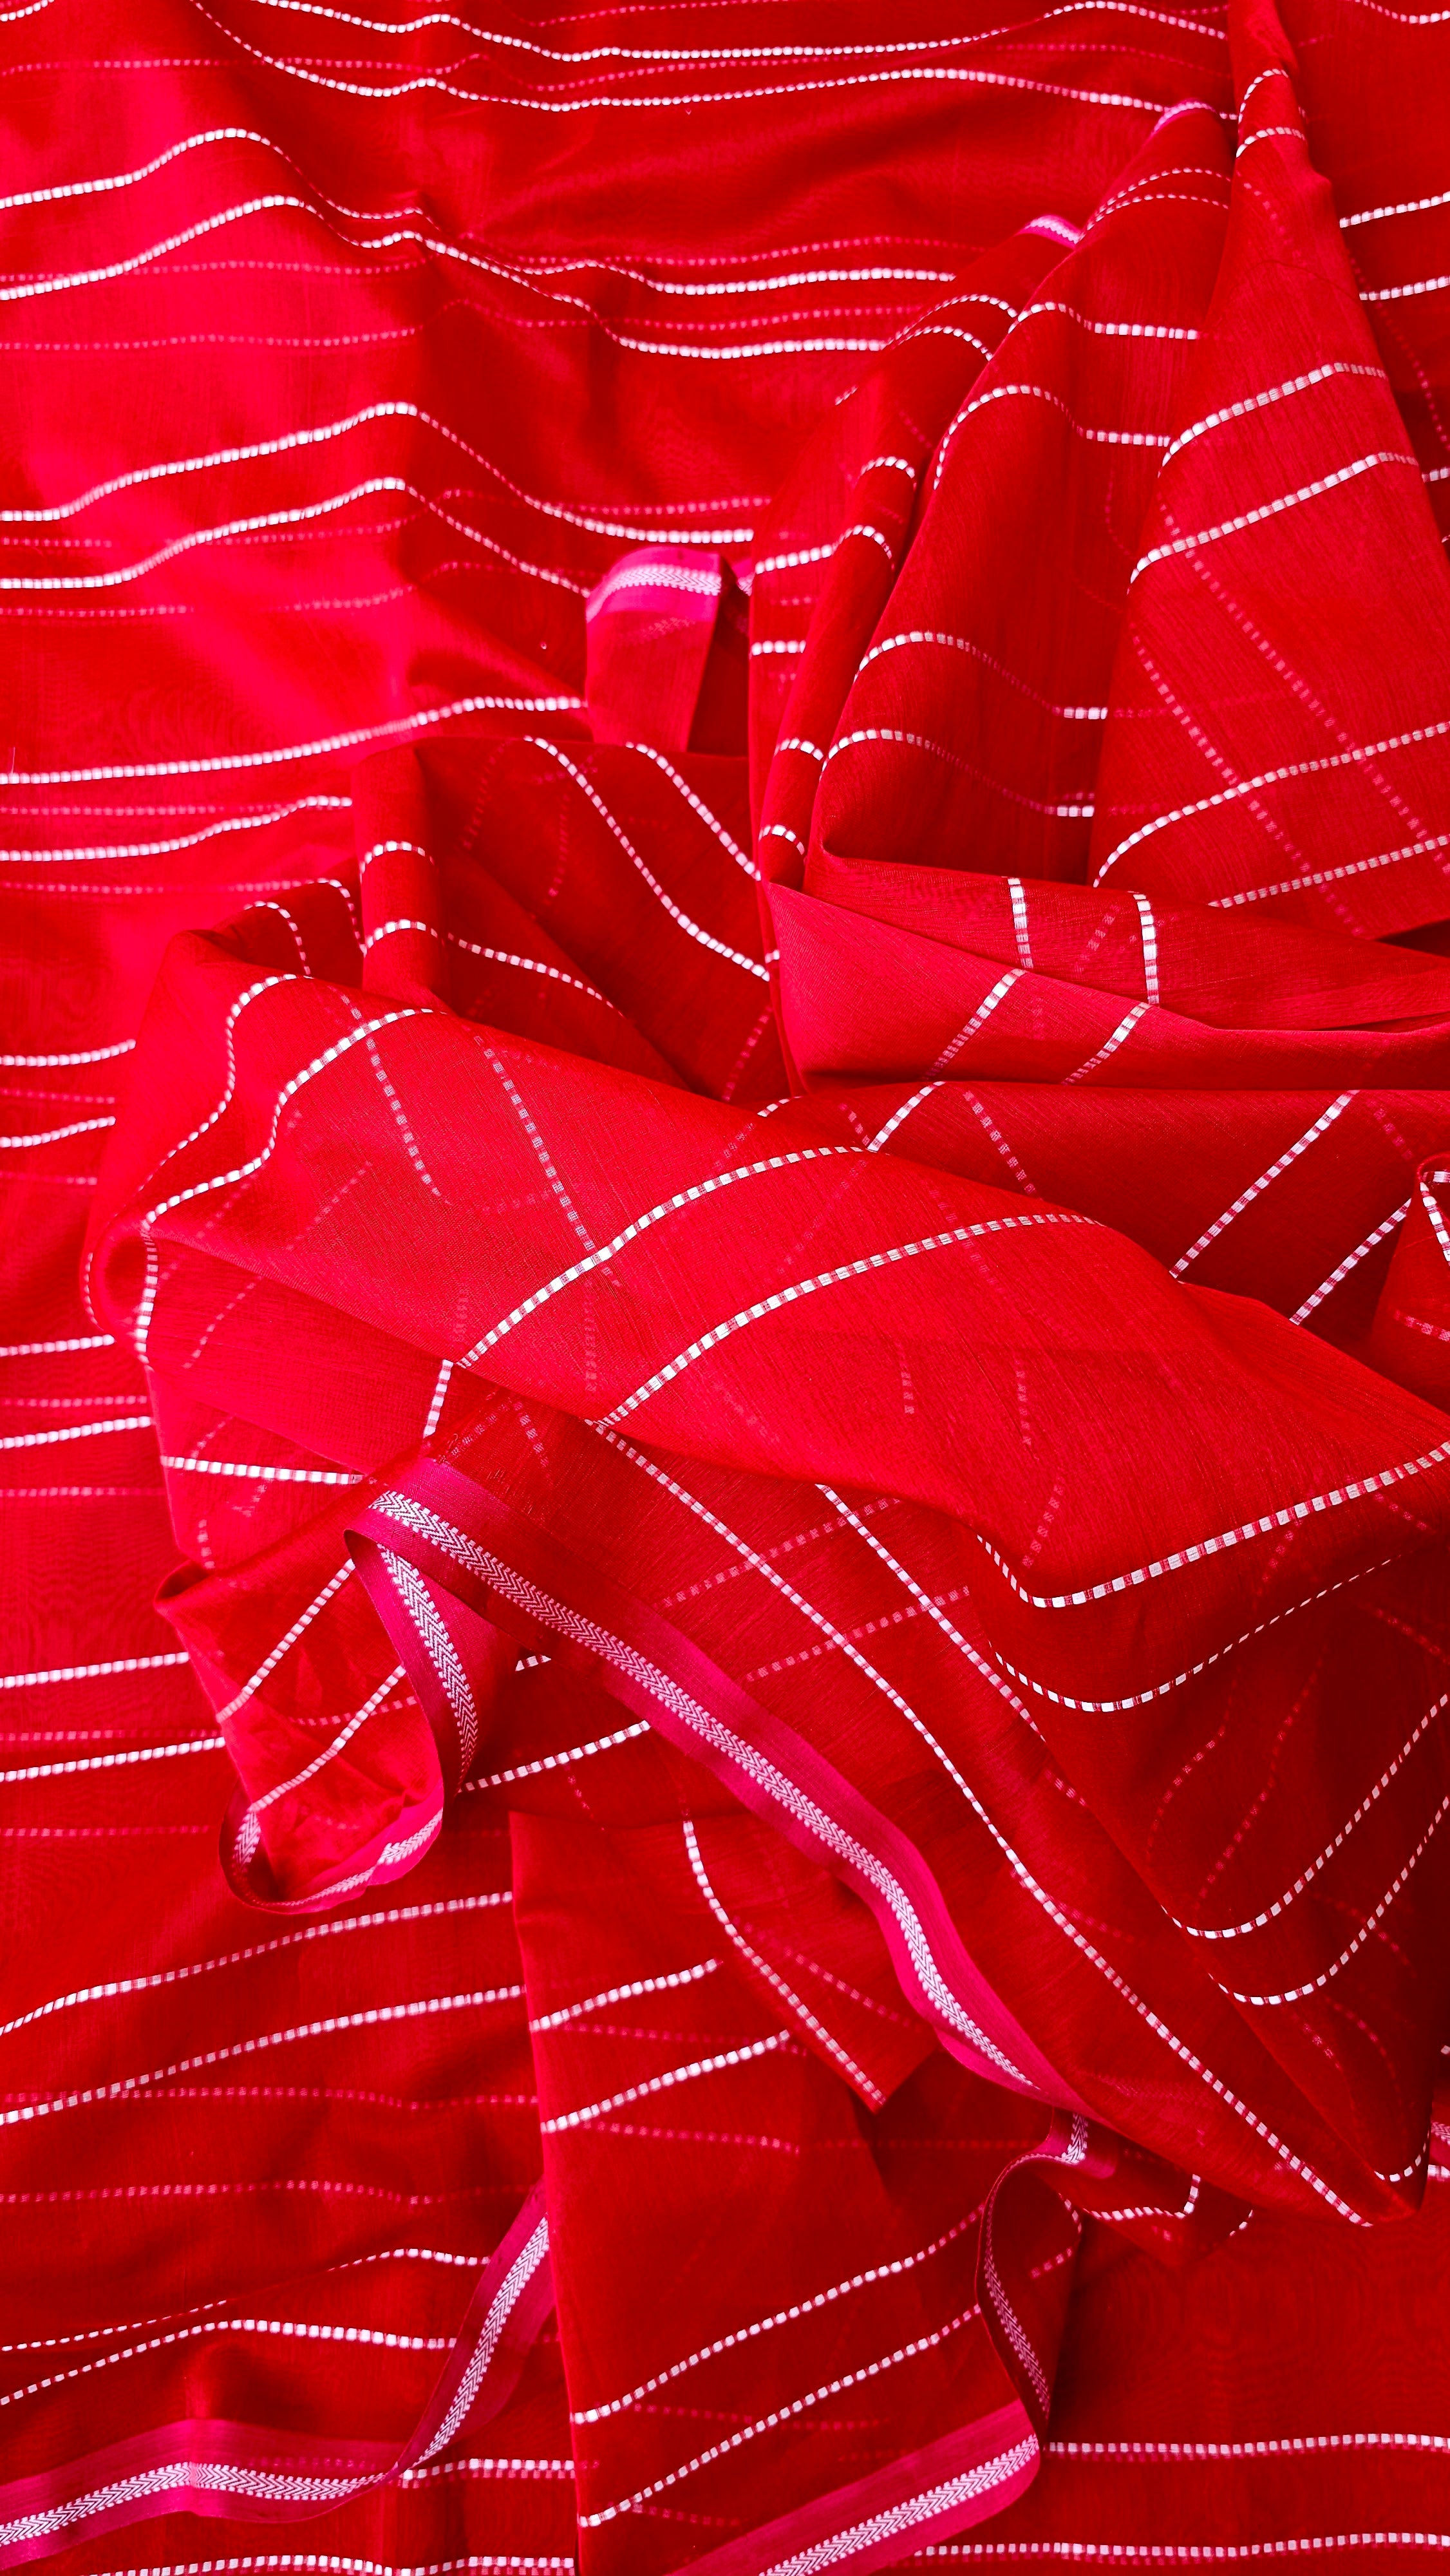 Red Fabric with White Muthda lines and Pink Borders.